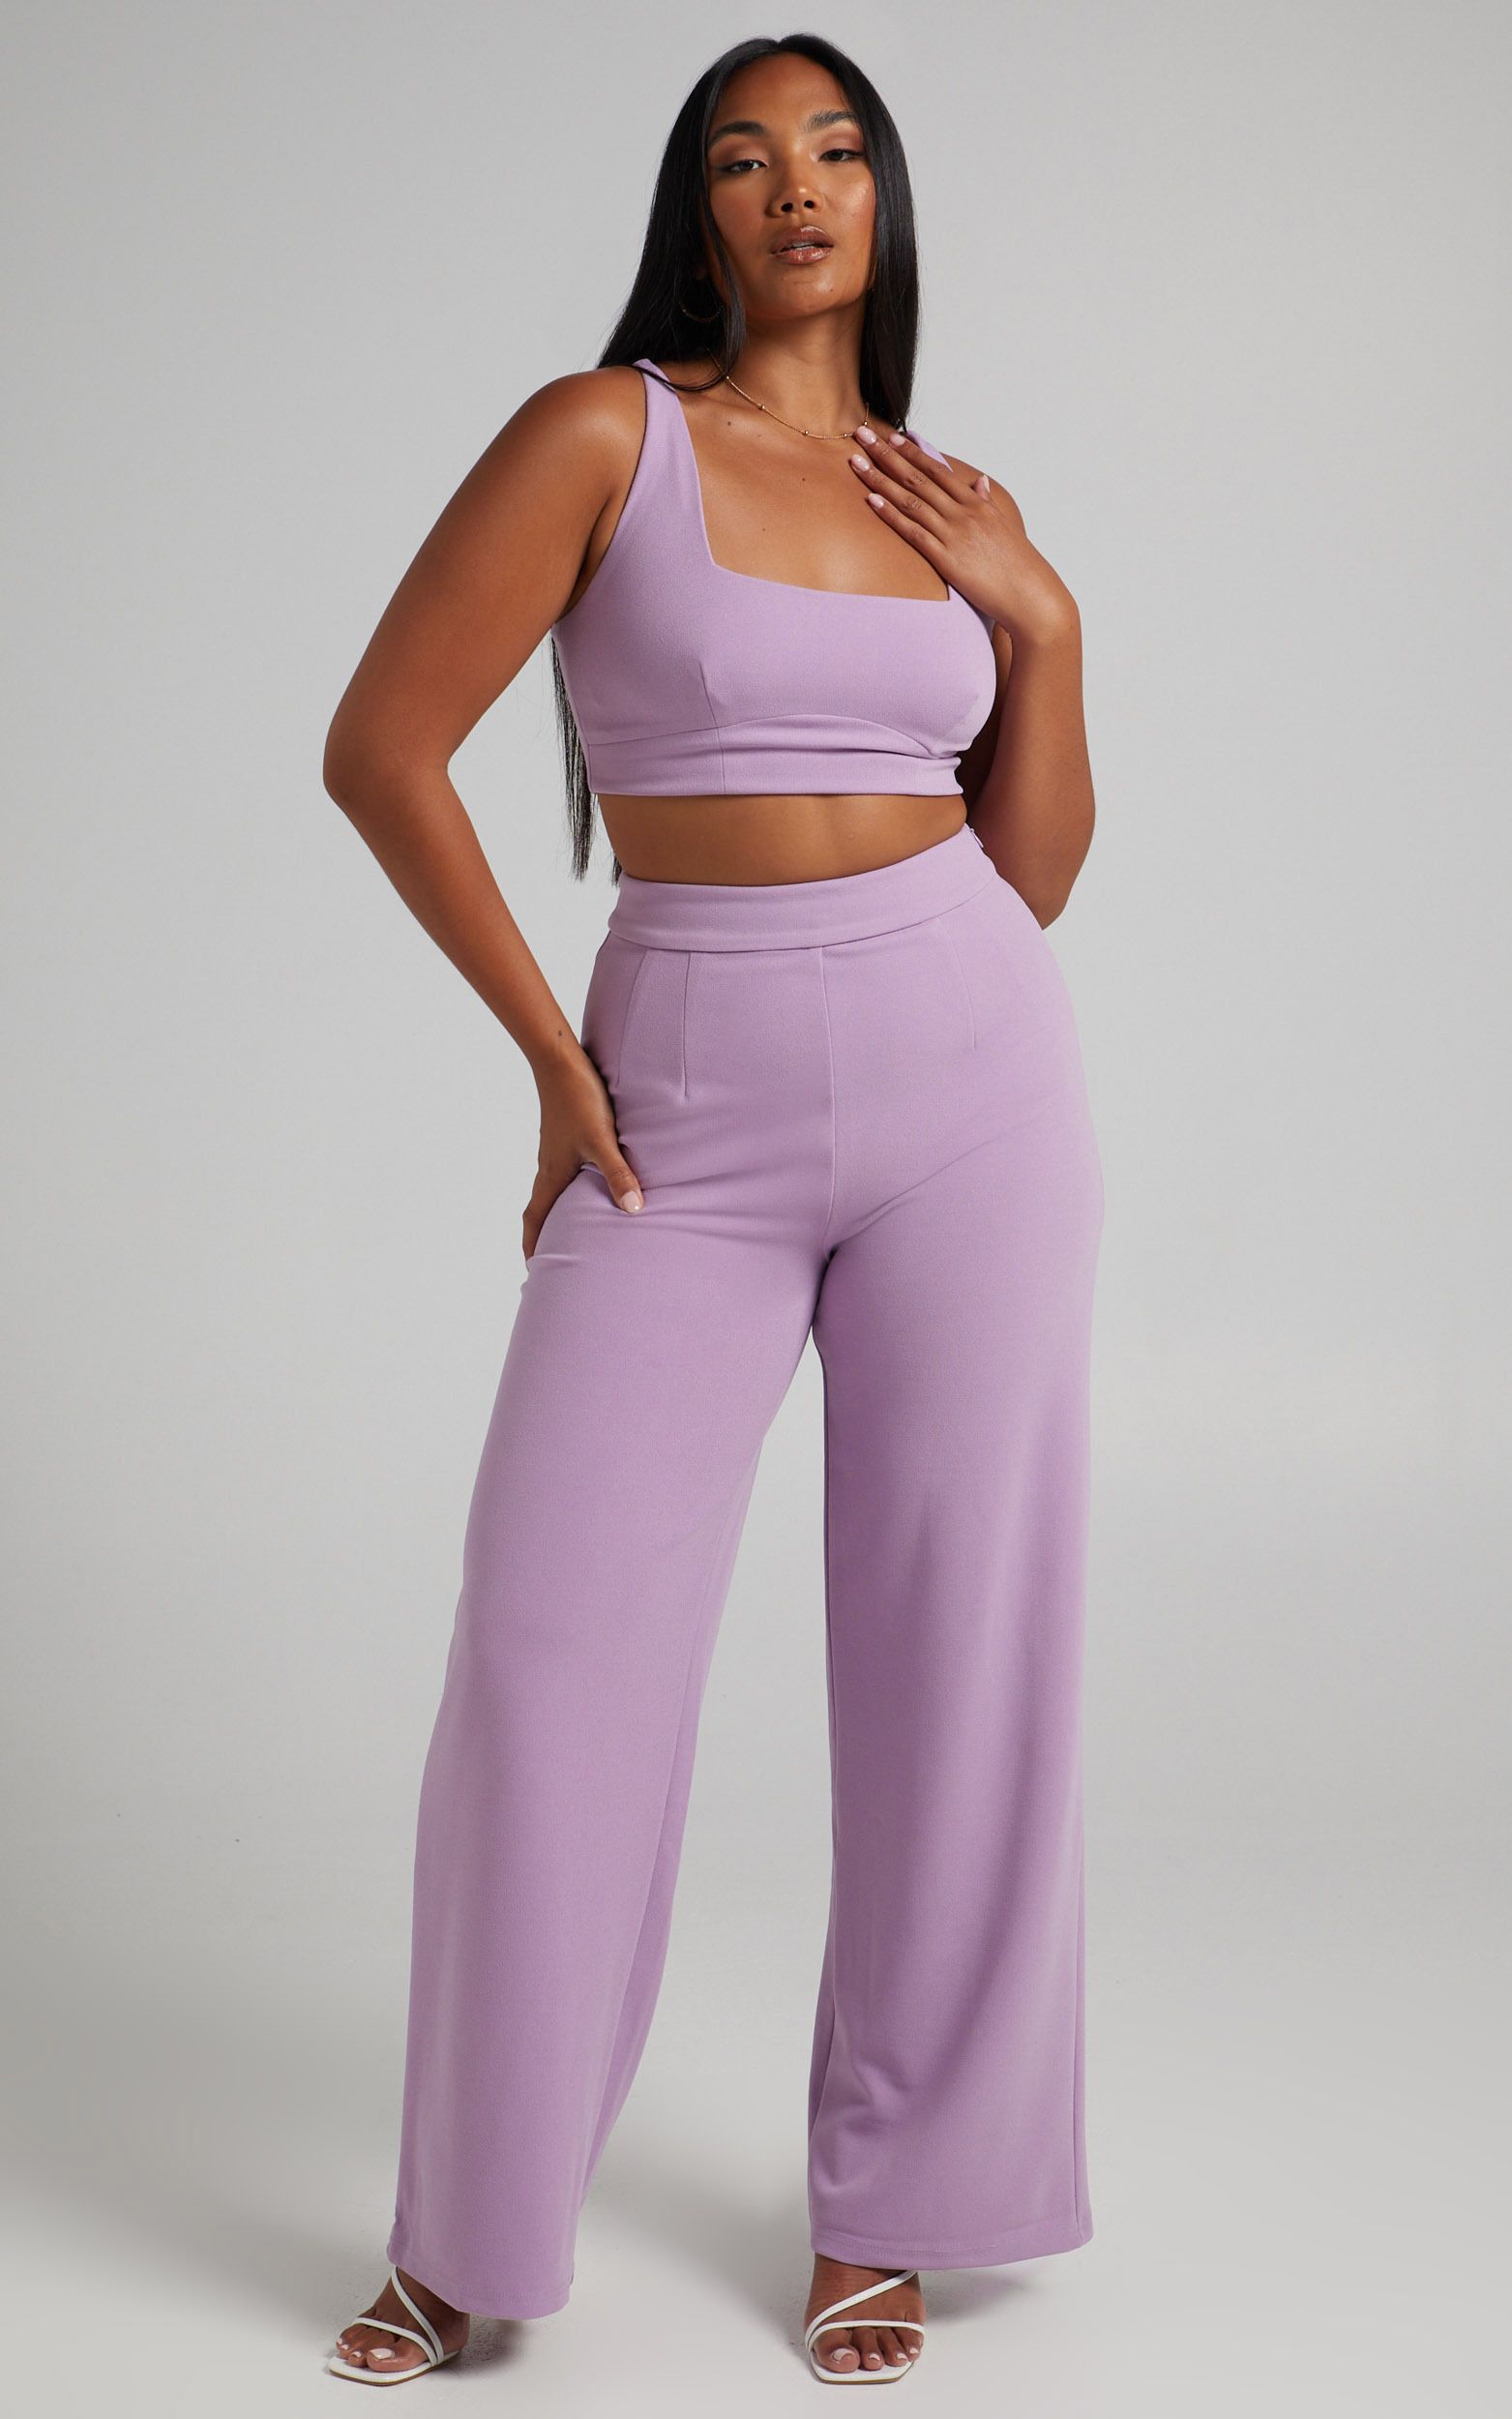 Elibeth Two Piece Set - Crop Top and High Waisted Wide Leg Pants in Lilac | Showpo (US, UK & Europe)